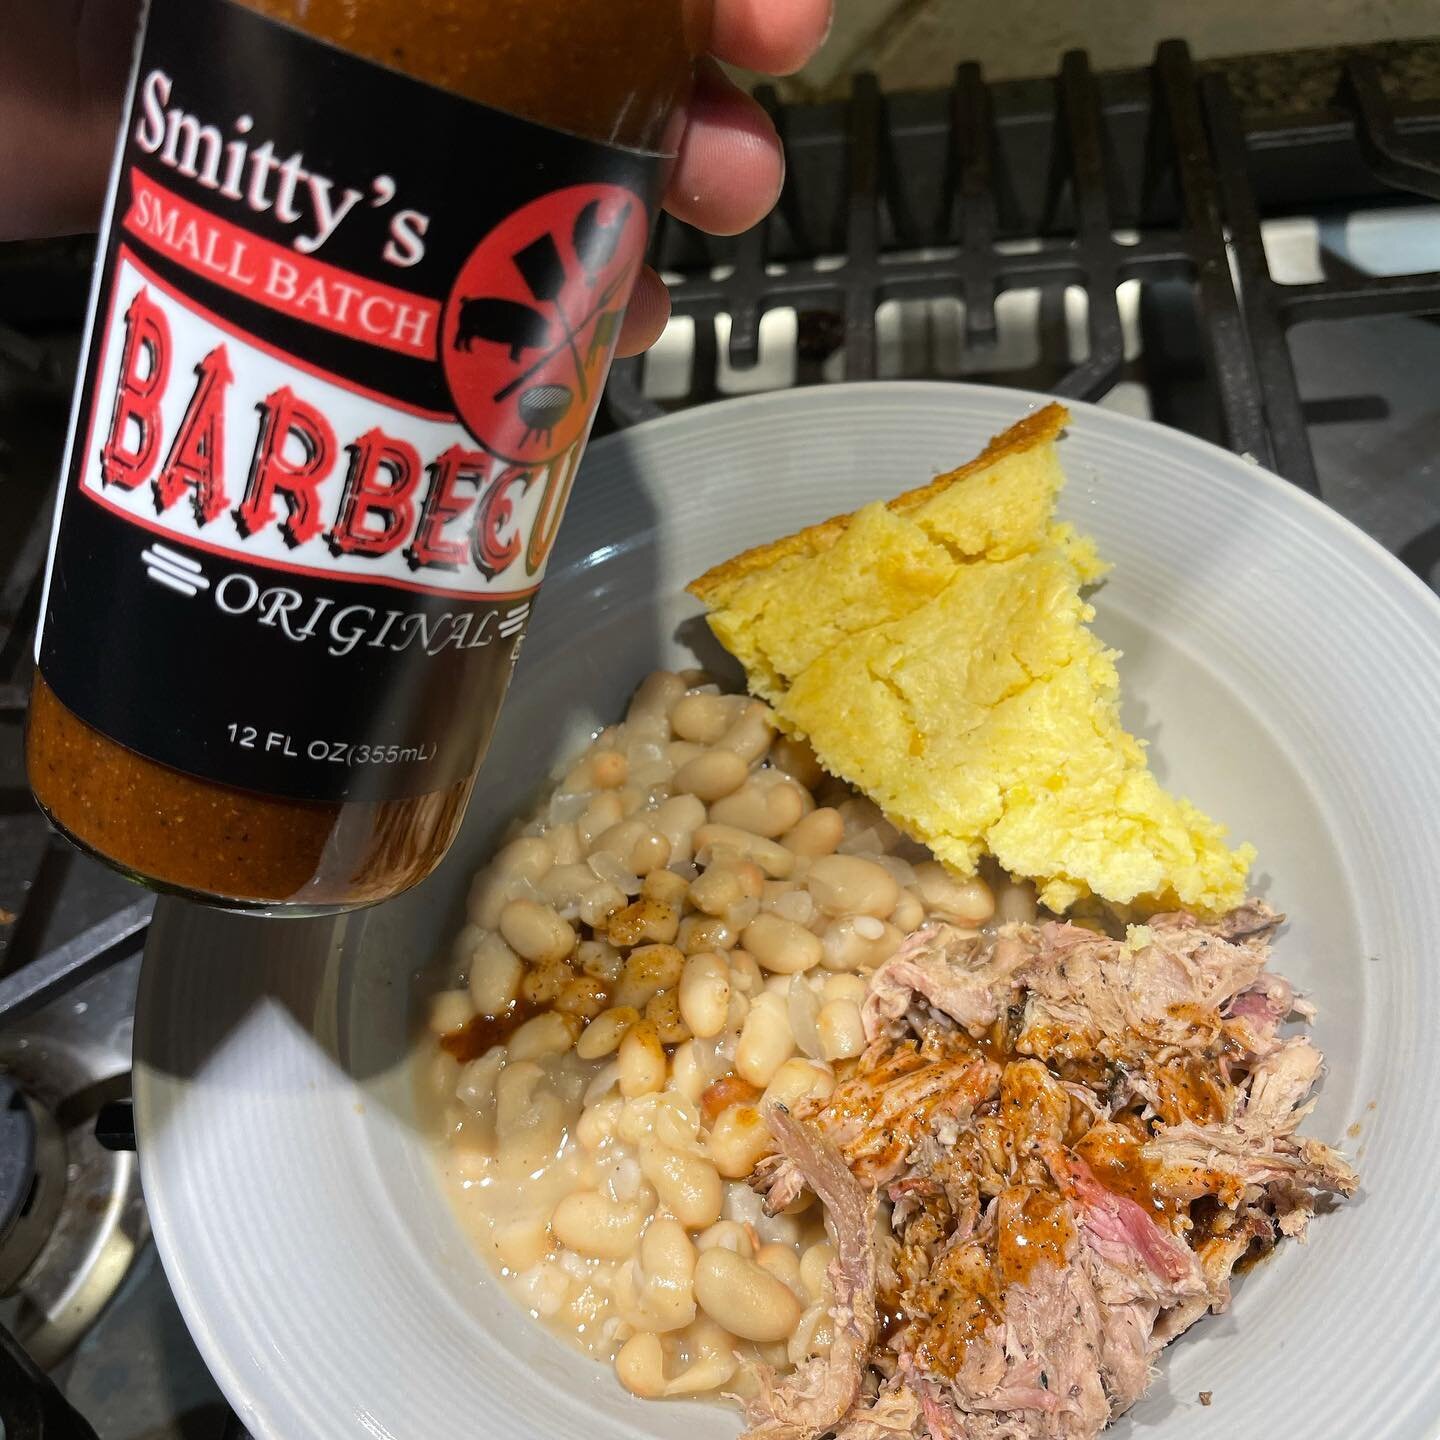 Yesterday&rsquo;s labor of love is tonight&rsquo;s dinner. @hushpiggies Smitty&rsquo;s Small Batch makes this pork and white beans sing! 🎶 Add some award winning (4-H Fourth Grade) sour cream cornbread for the win! 
#smittyssmallbatch #hushpiggies #